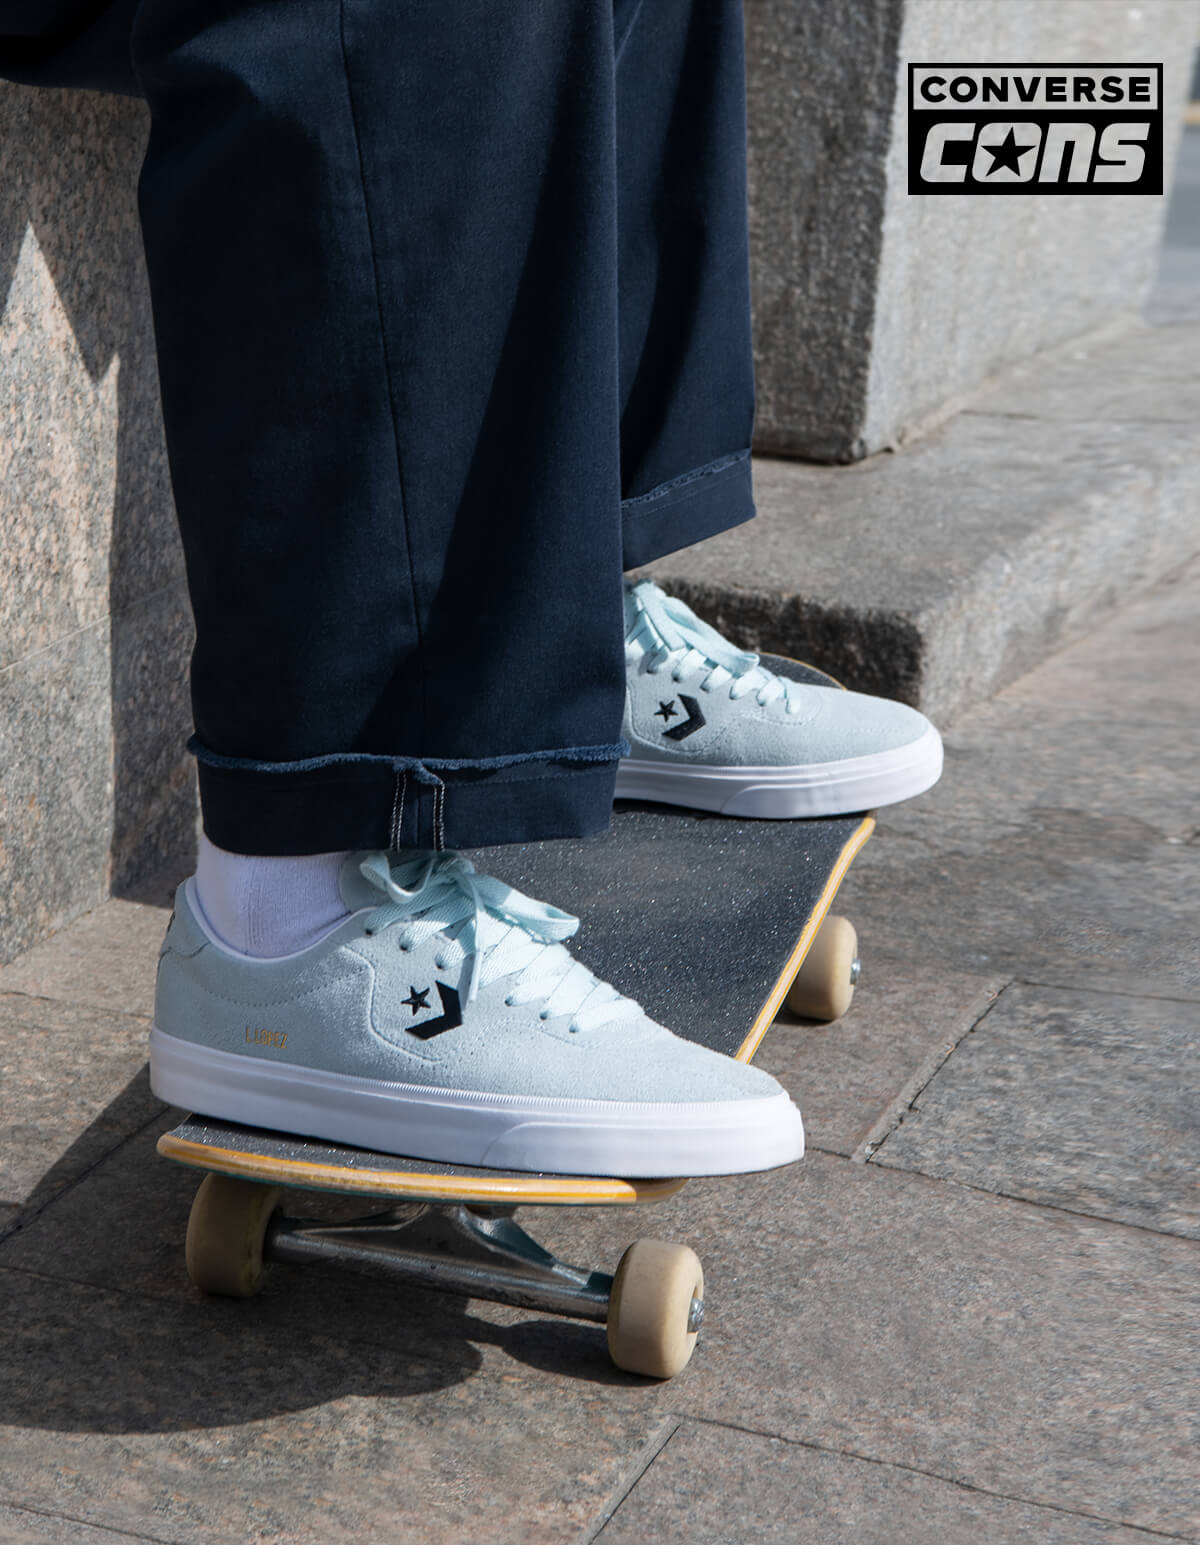 NEW ARRIVAL SKATE SHOES FROM CONVERSE & MORE - SHOP NEW SHOES